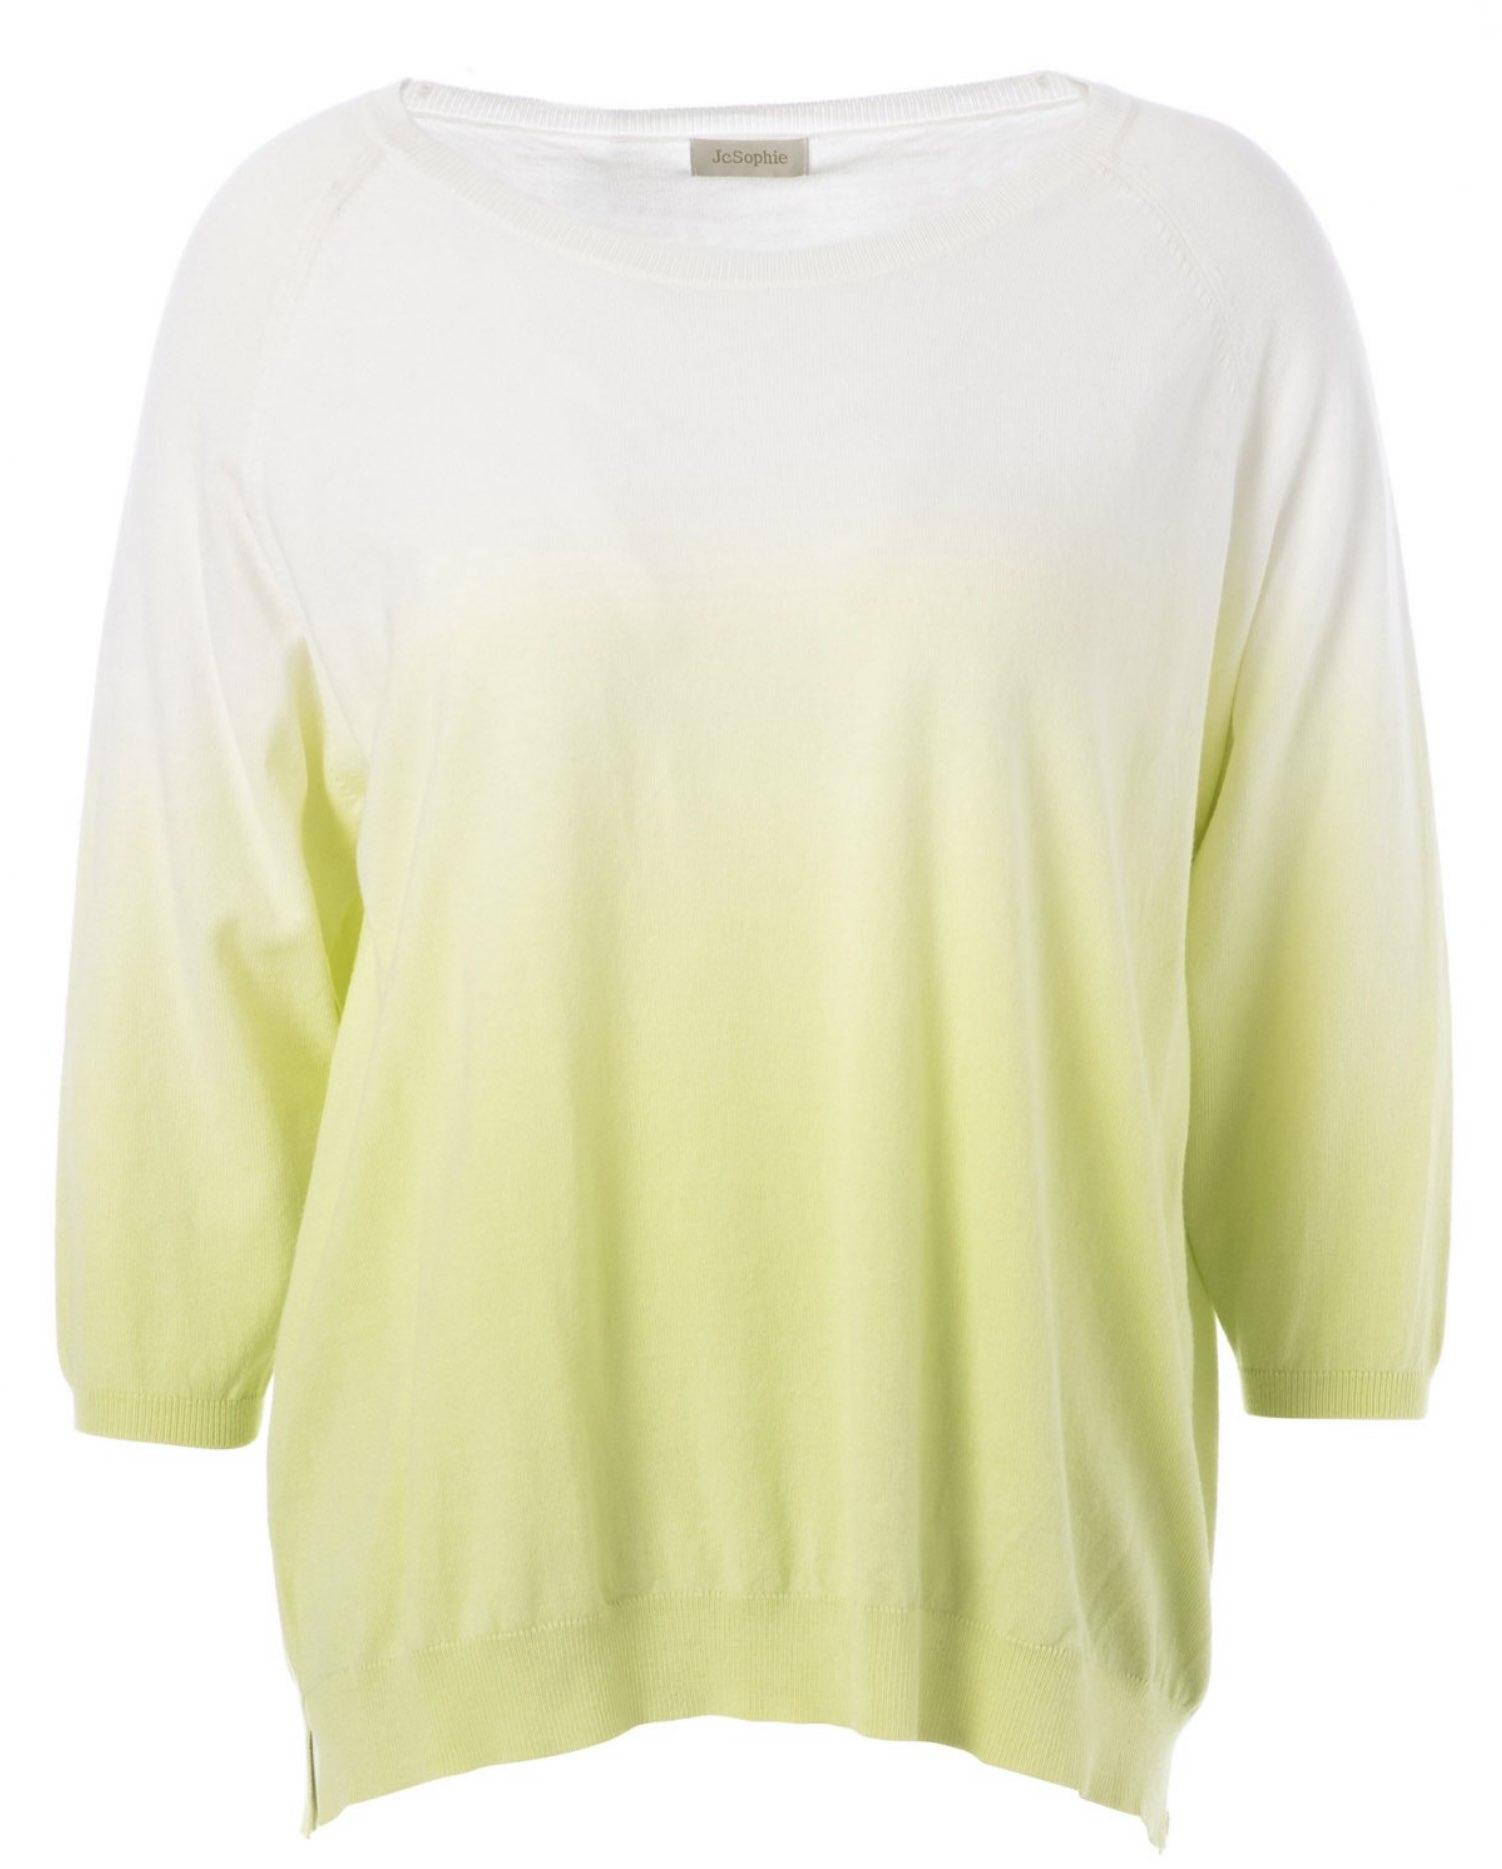 JcSophie C3122 Sweater Connor Lime